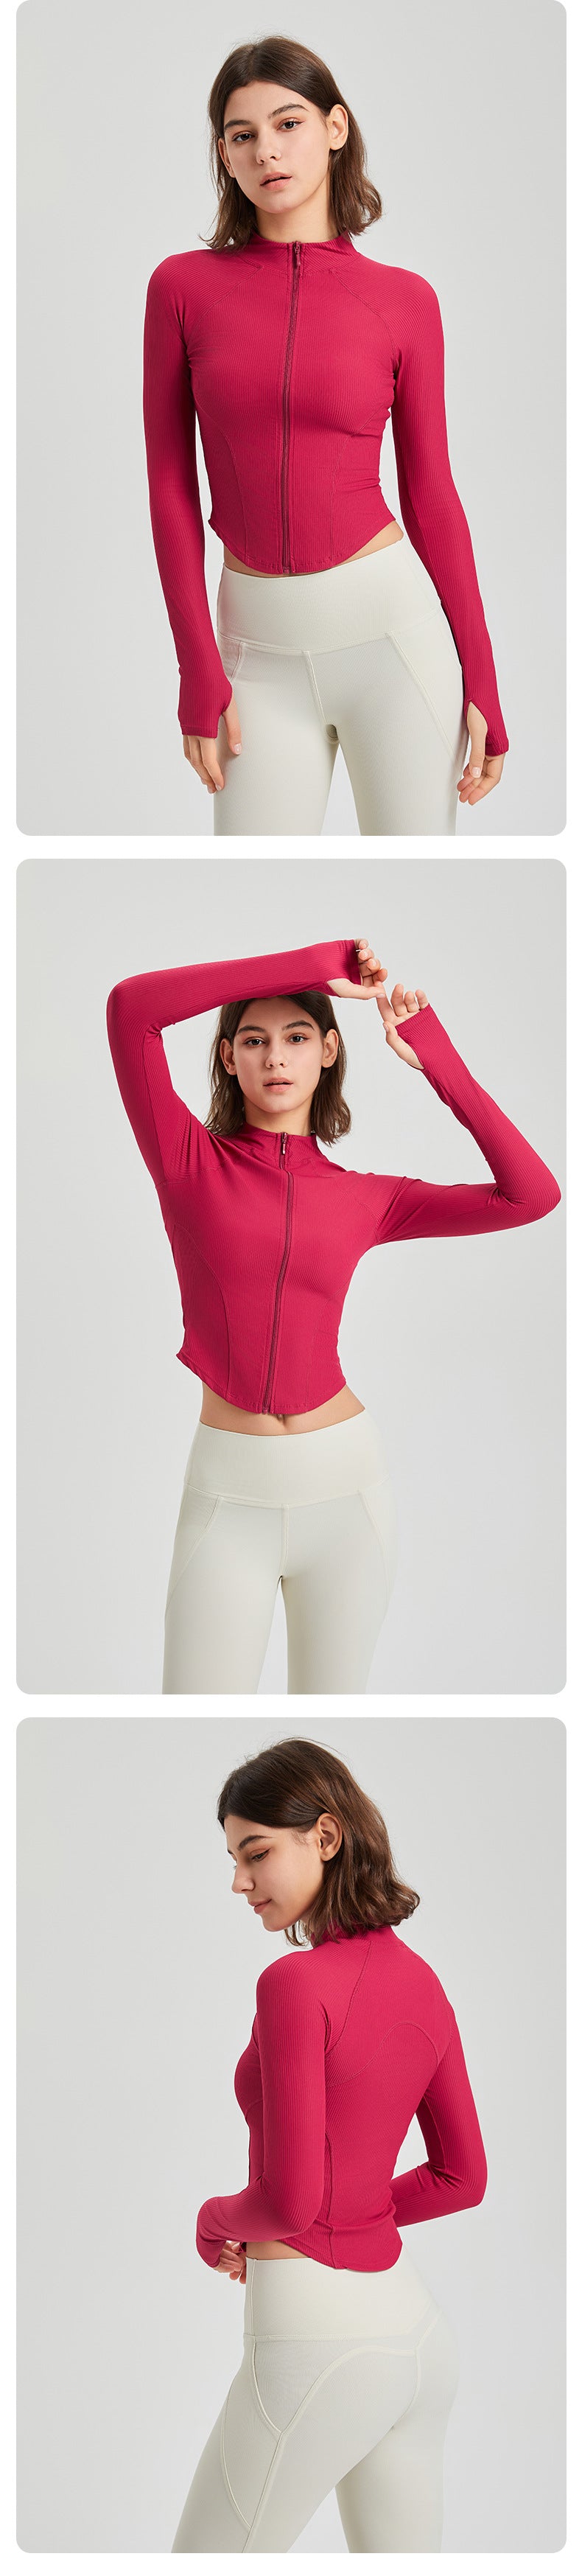 2023.08 Shaping yoga clothing women's casual jacket long-sleeved zipper hooded running skin-friendly sports fitness top